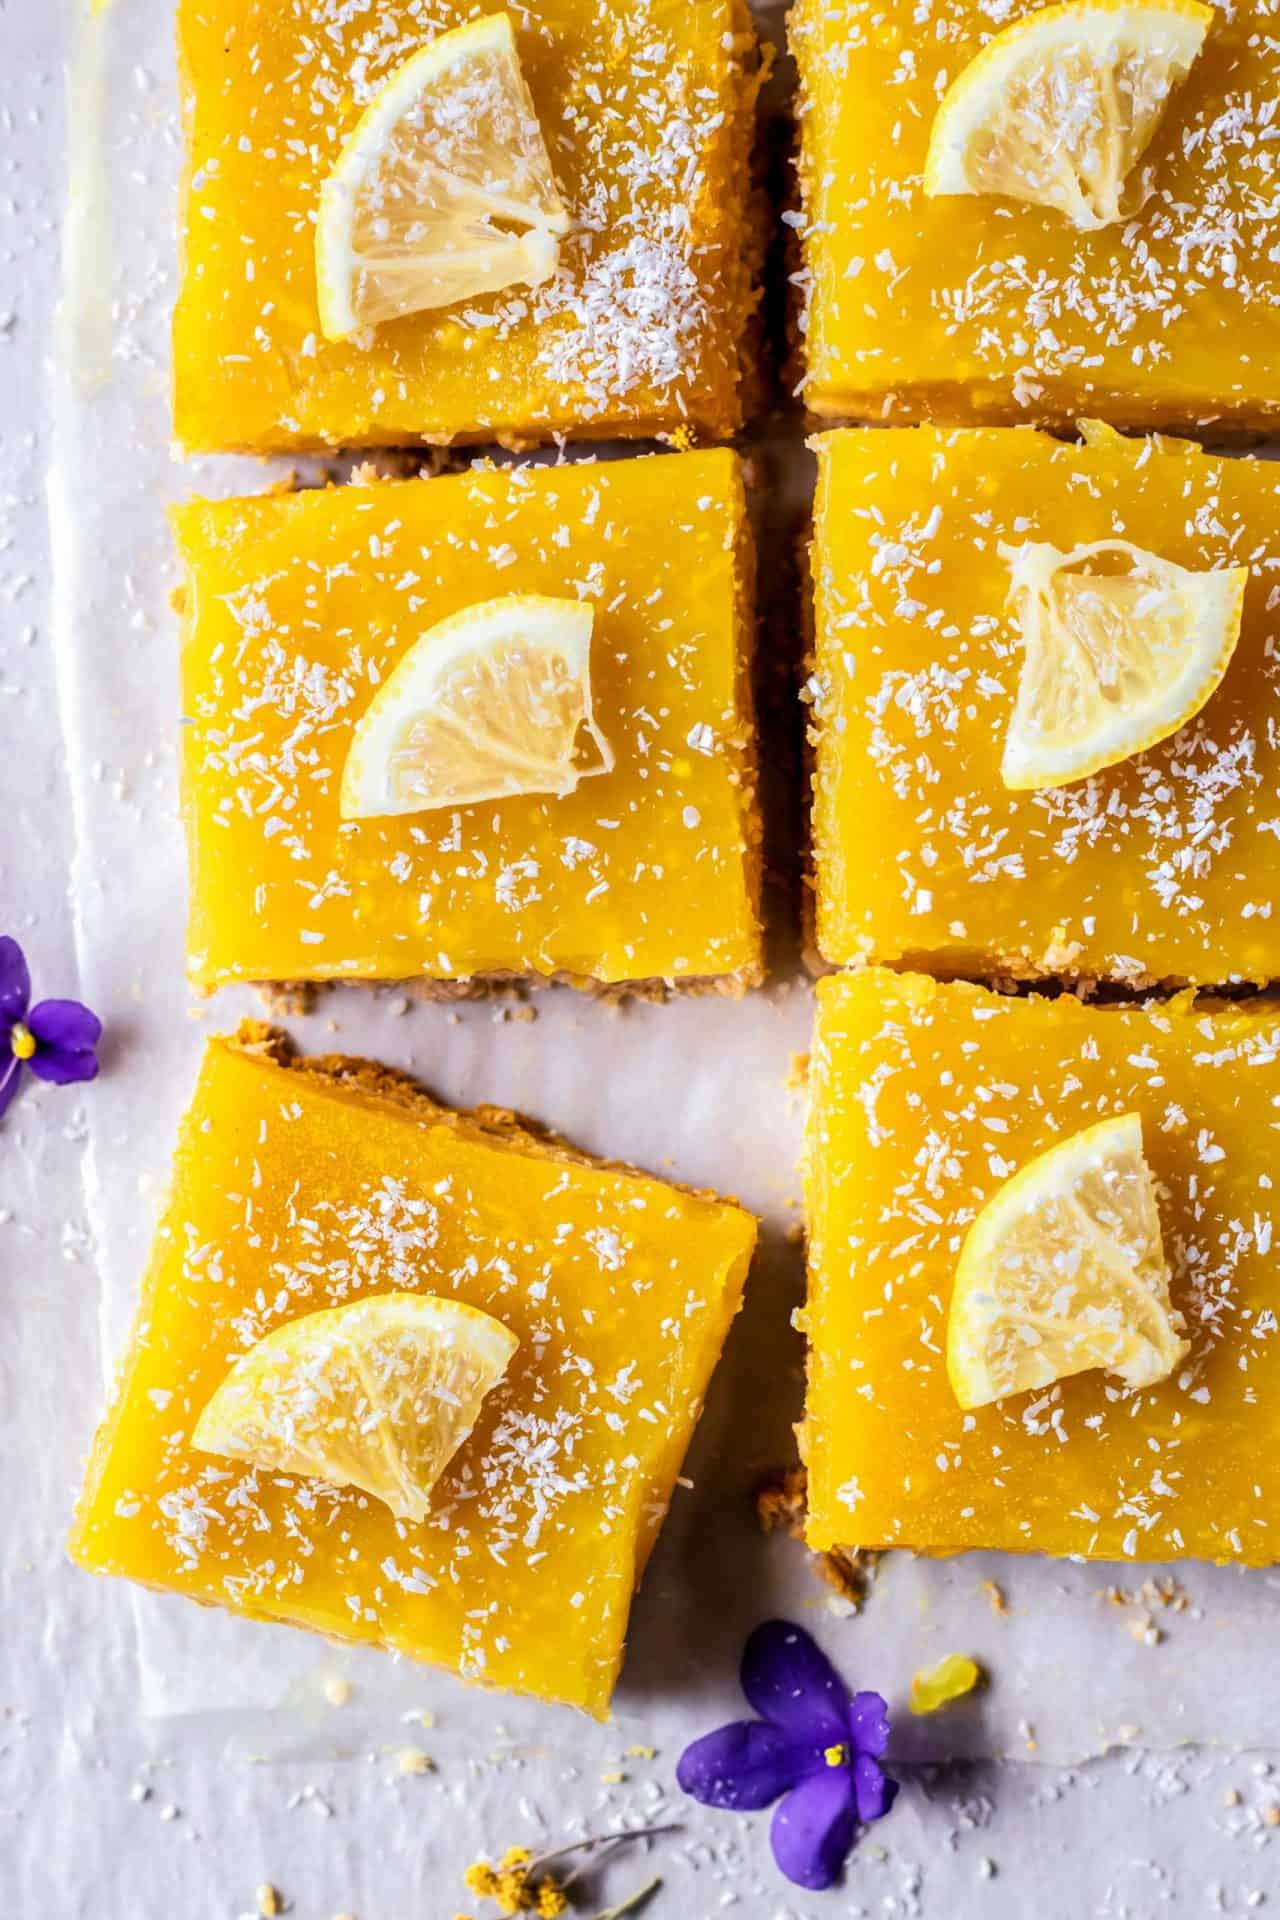 These Vegan Lemon Bars are incredibly refreshing, light, lemony, not too sweet, healthier than the traditional lemon bars and so delicious!